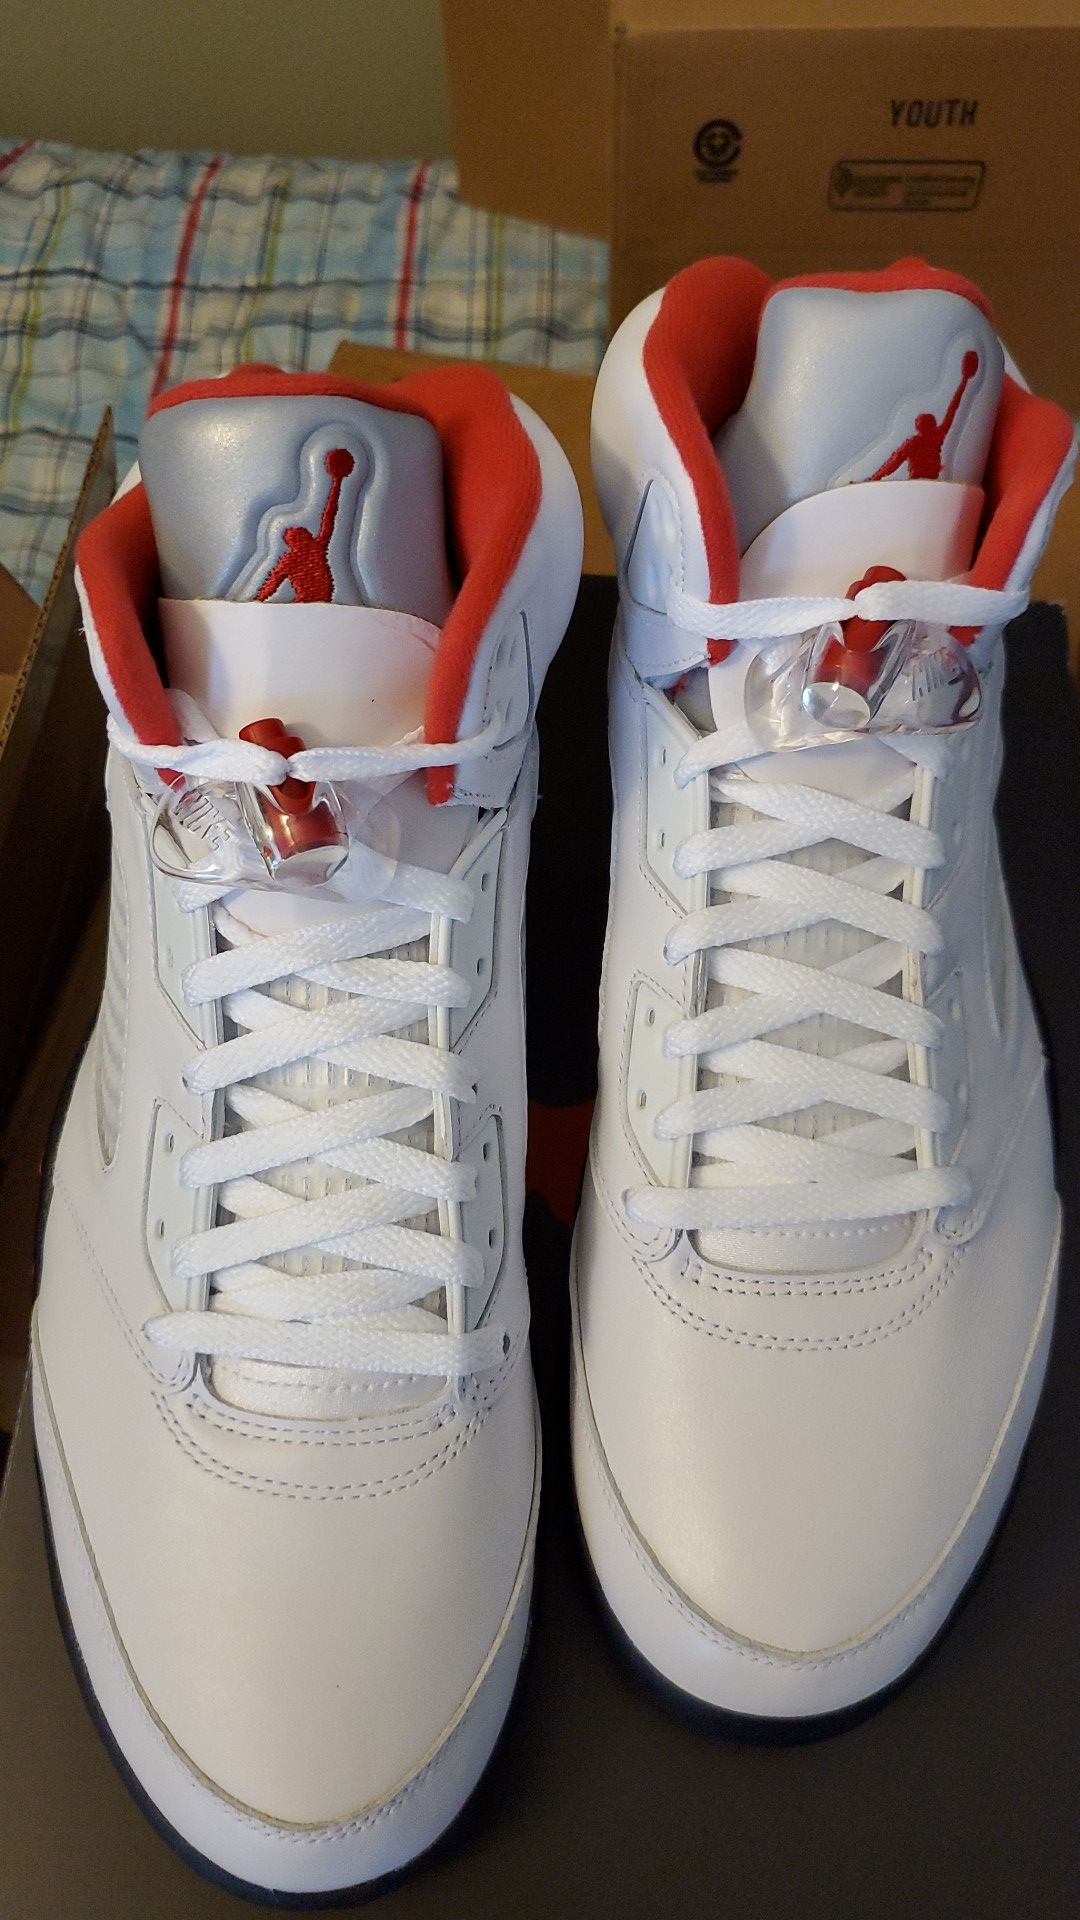 BRAND NEW IN BOX Nike Air Jordan Retro 5 Fire Red/Silver Tongue Size 12